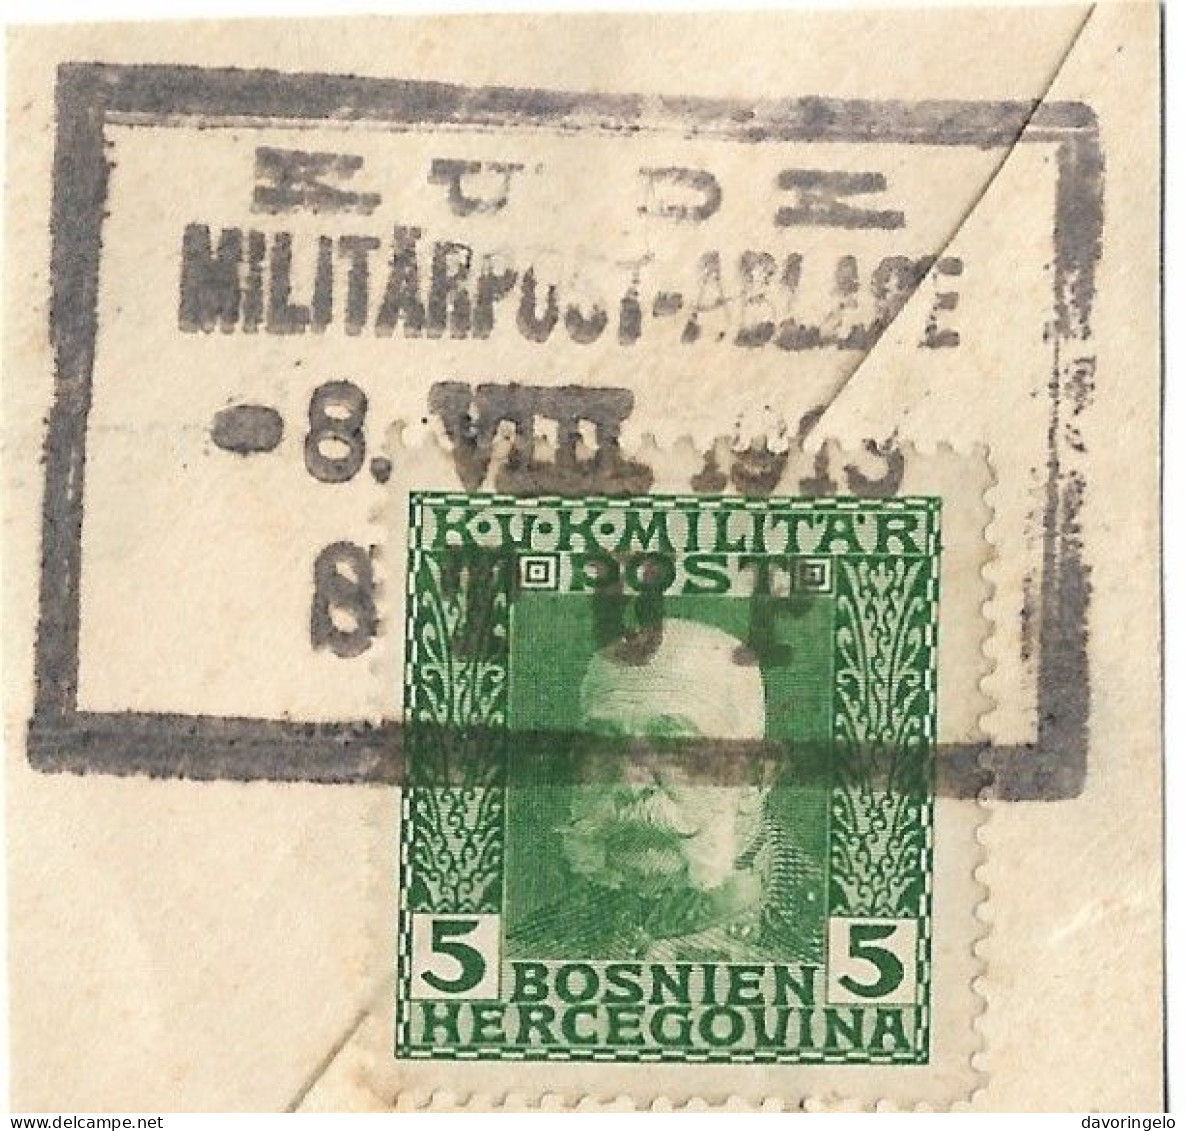 Bosnia-Herzegovina/Austria-Hungary, Cutting Out-year 1913, Auxiliary Post Office/Ablage STUP, Type B1(BLACK) - Bosnien-Herzegowina